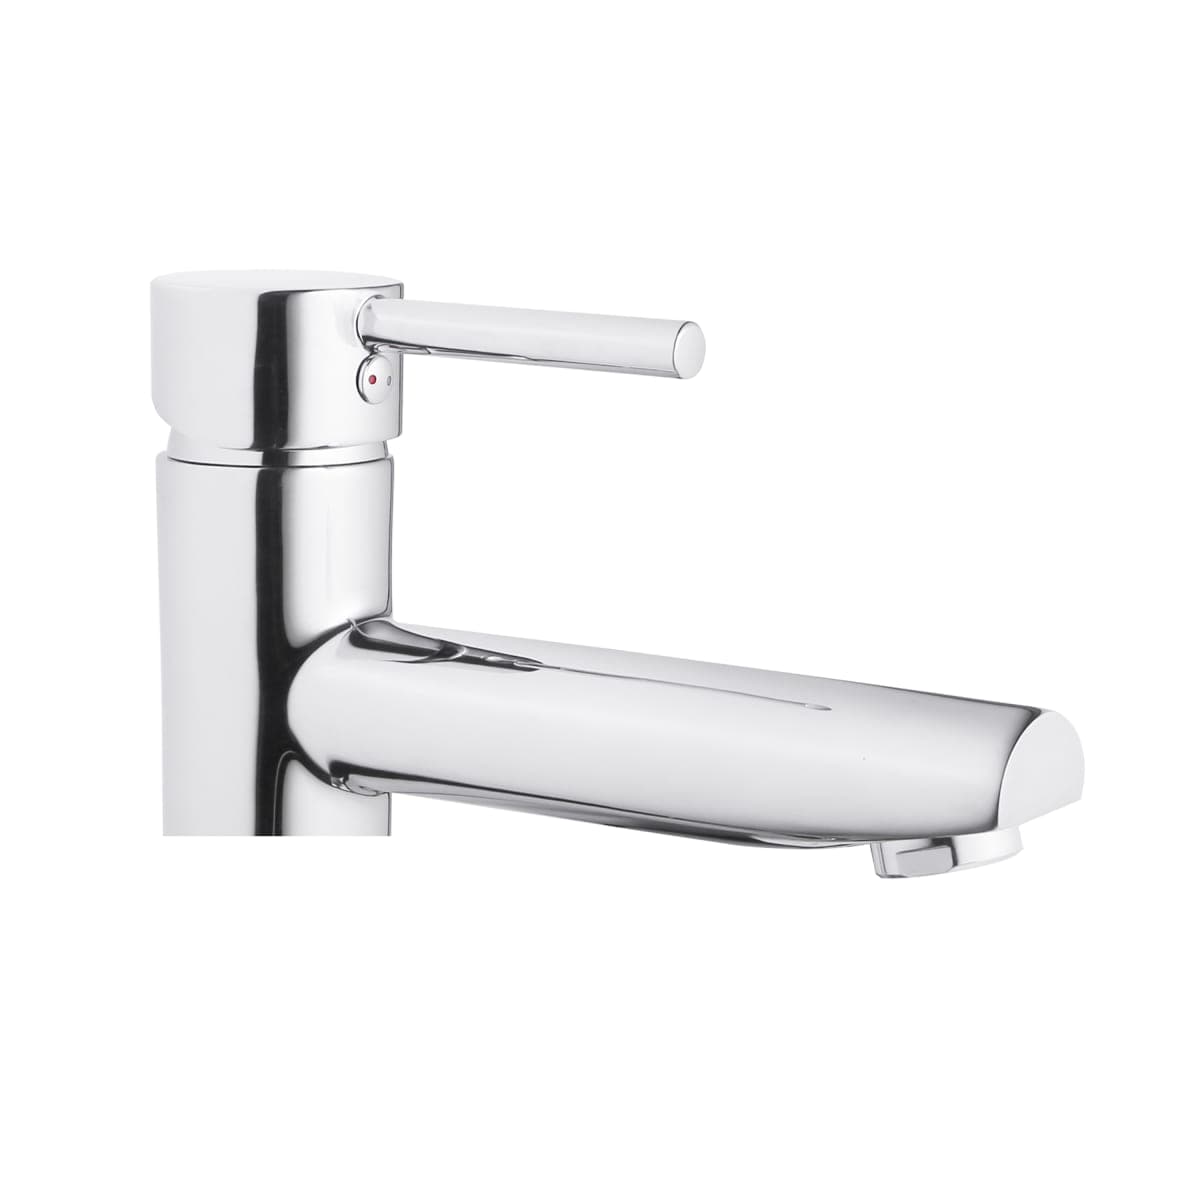 HILO HIGH BASIN MIXER WITHOUT WASTE - best price from Maltashopper.com BR430003265